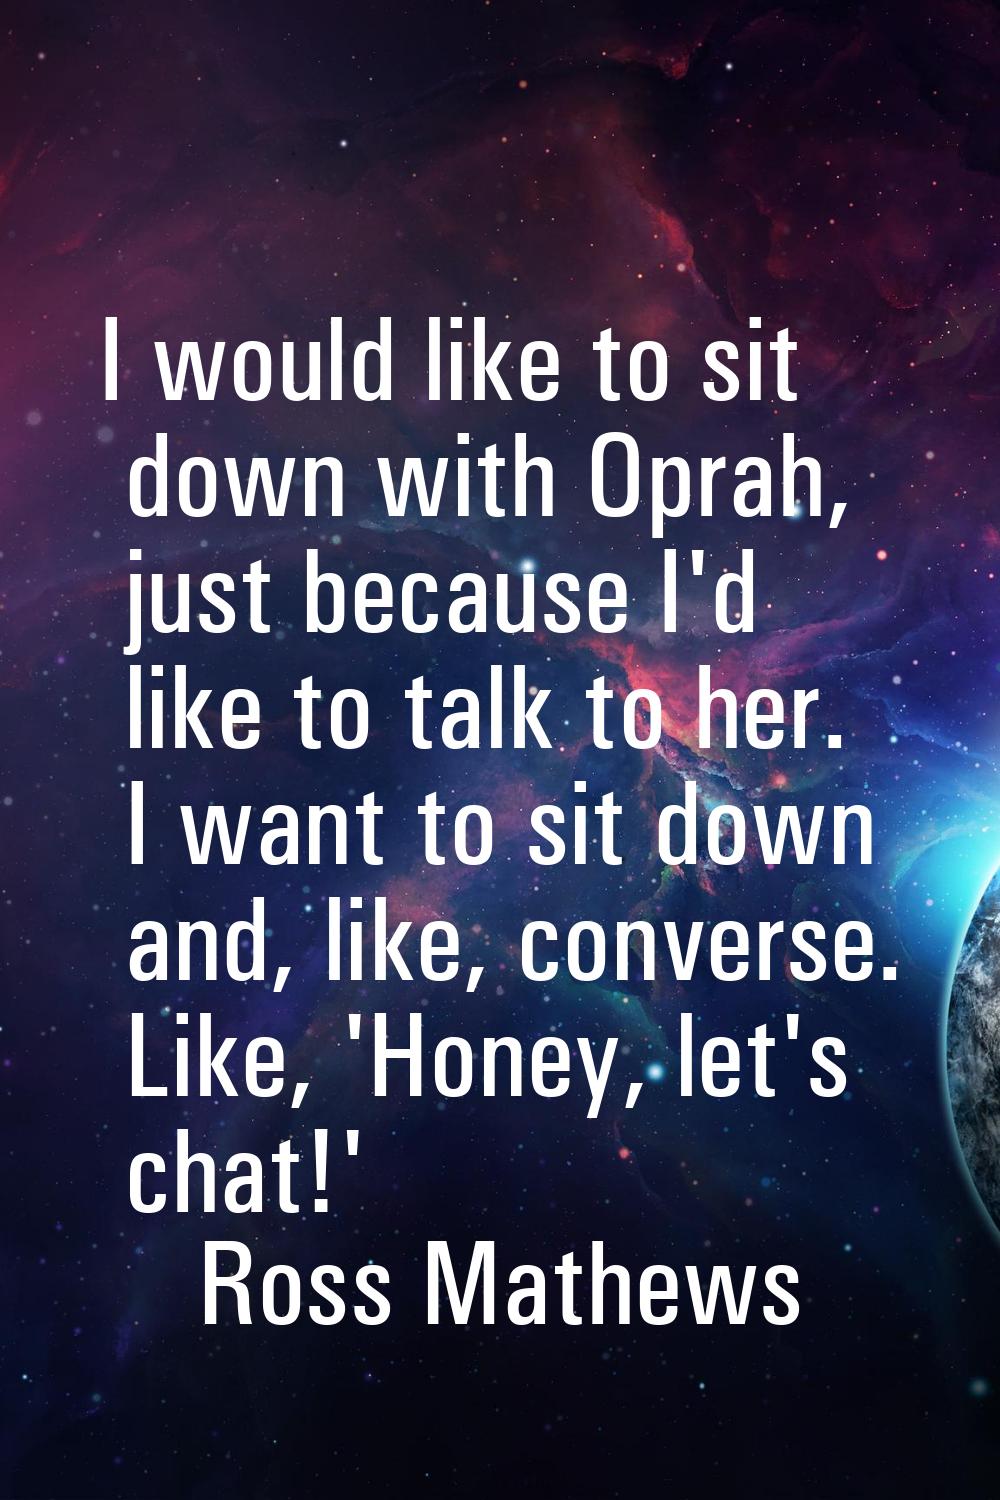 I would like to sit down with Oprah, just because I'd like to talk to her. I want to sit down and, 